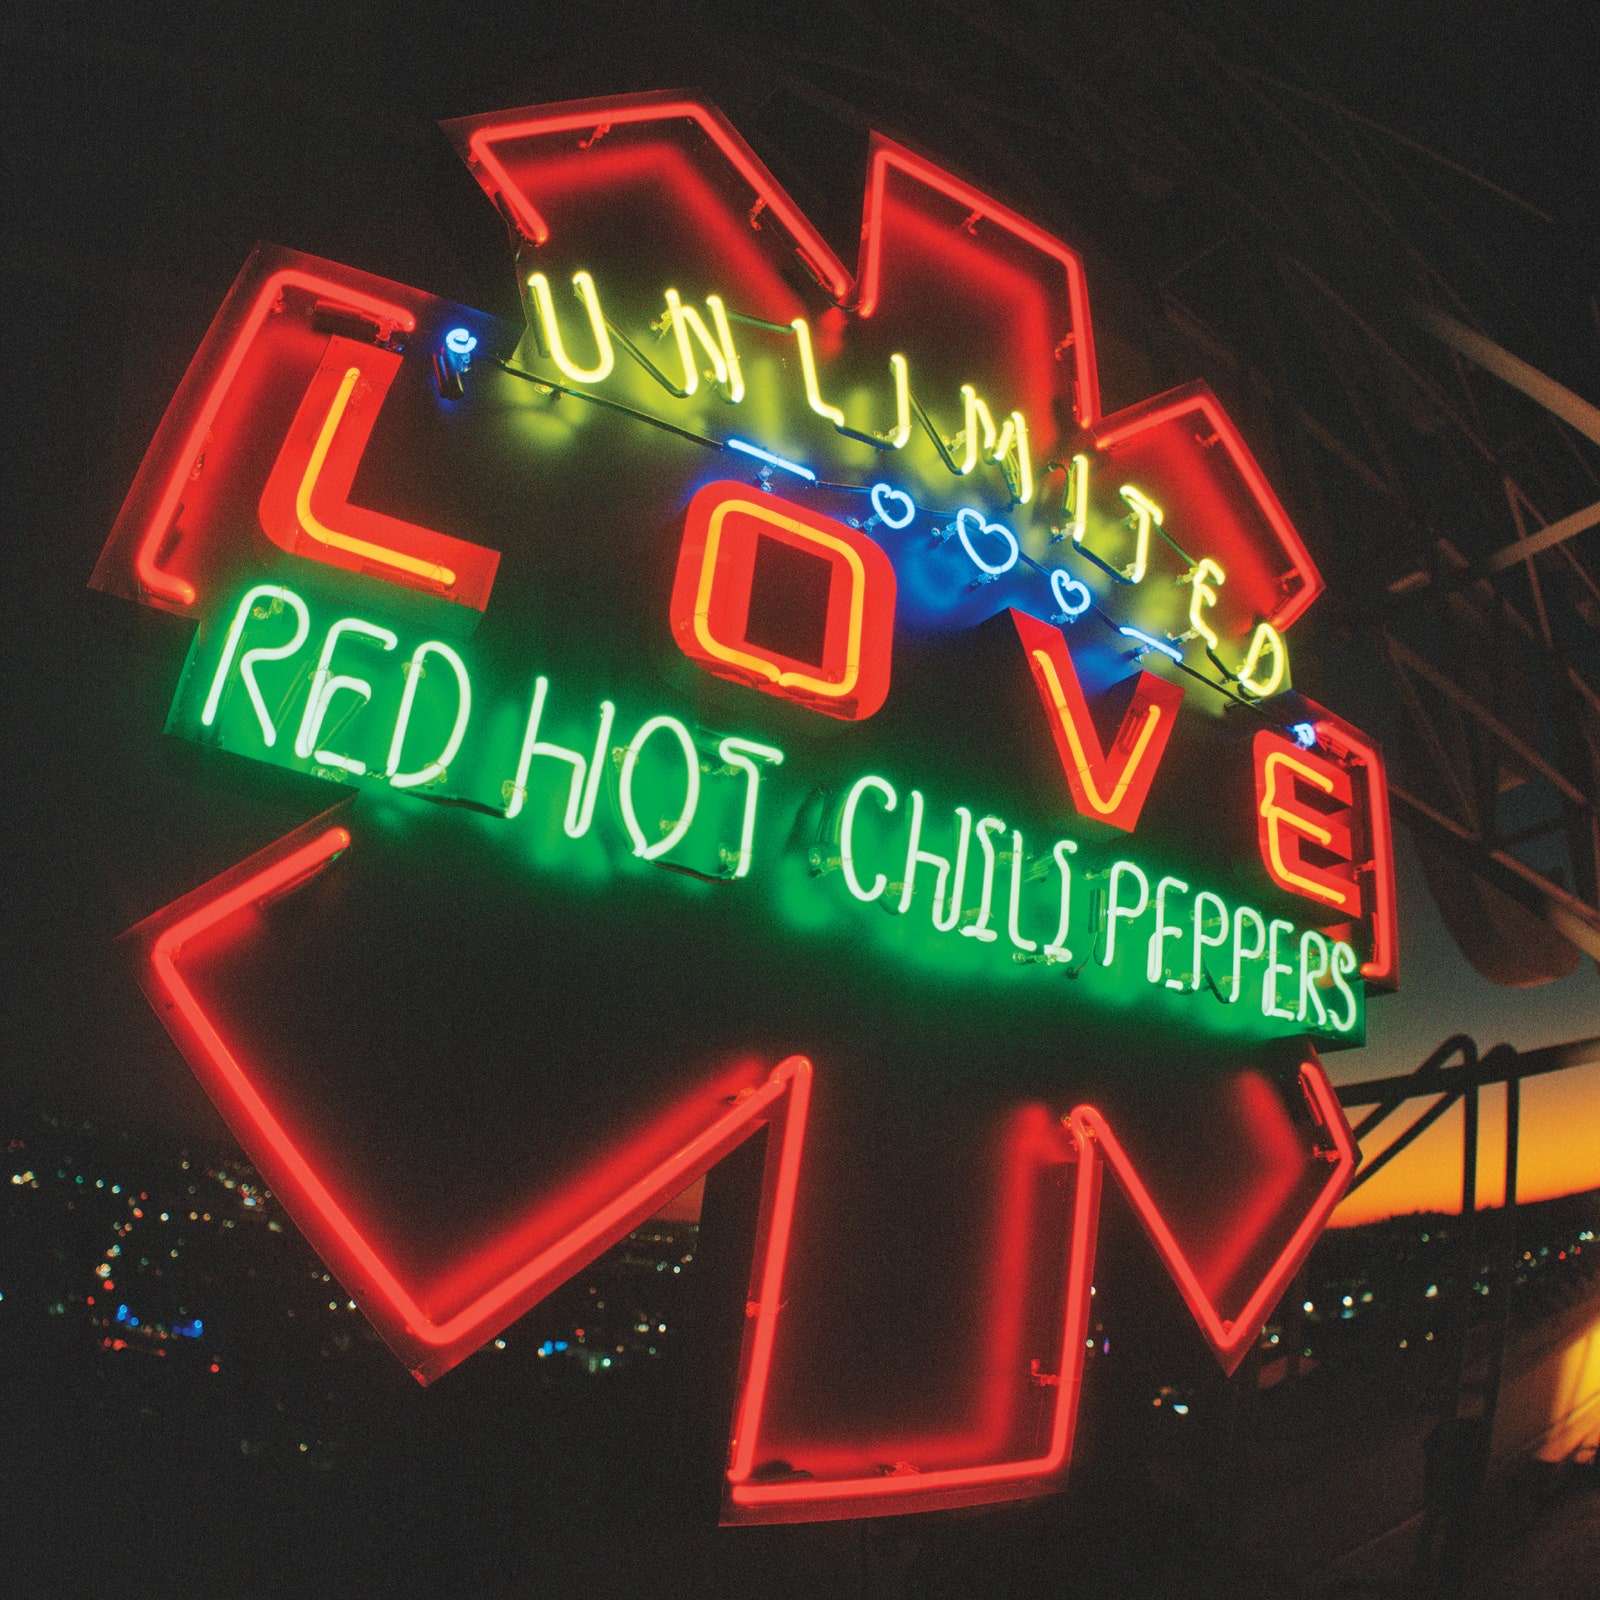 audio review : Unlimited Love ( album ) ... Red Hot Chili Peppers